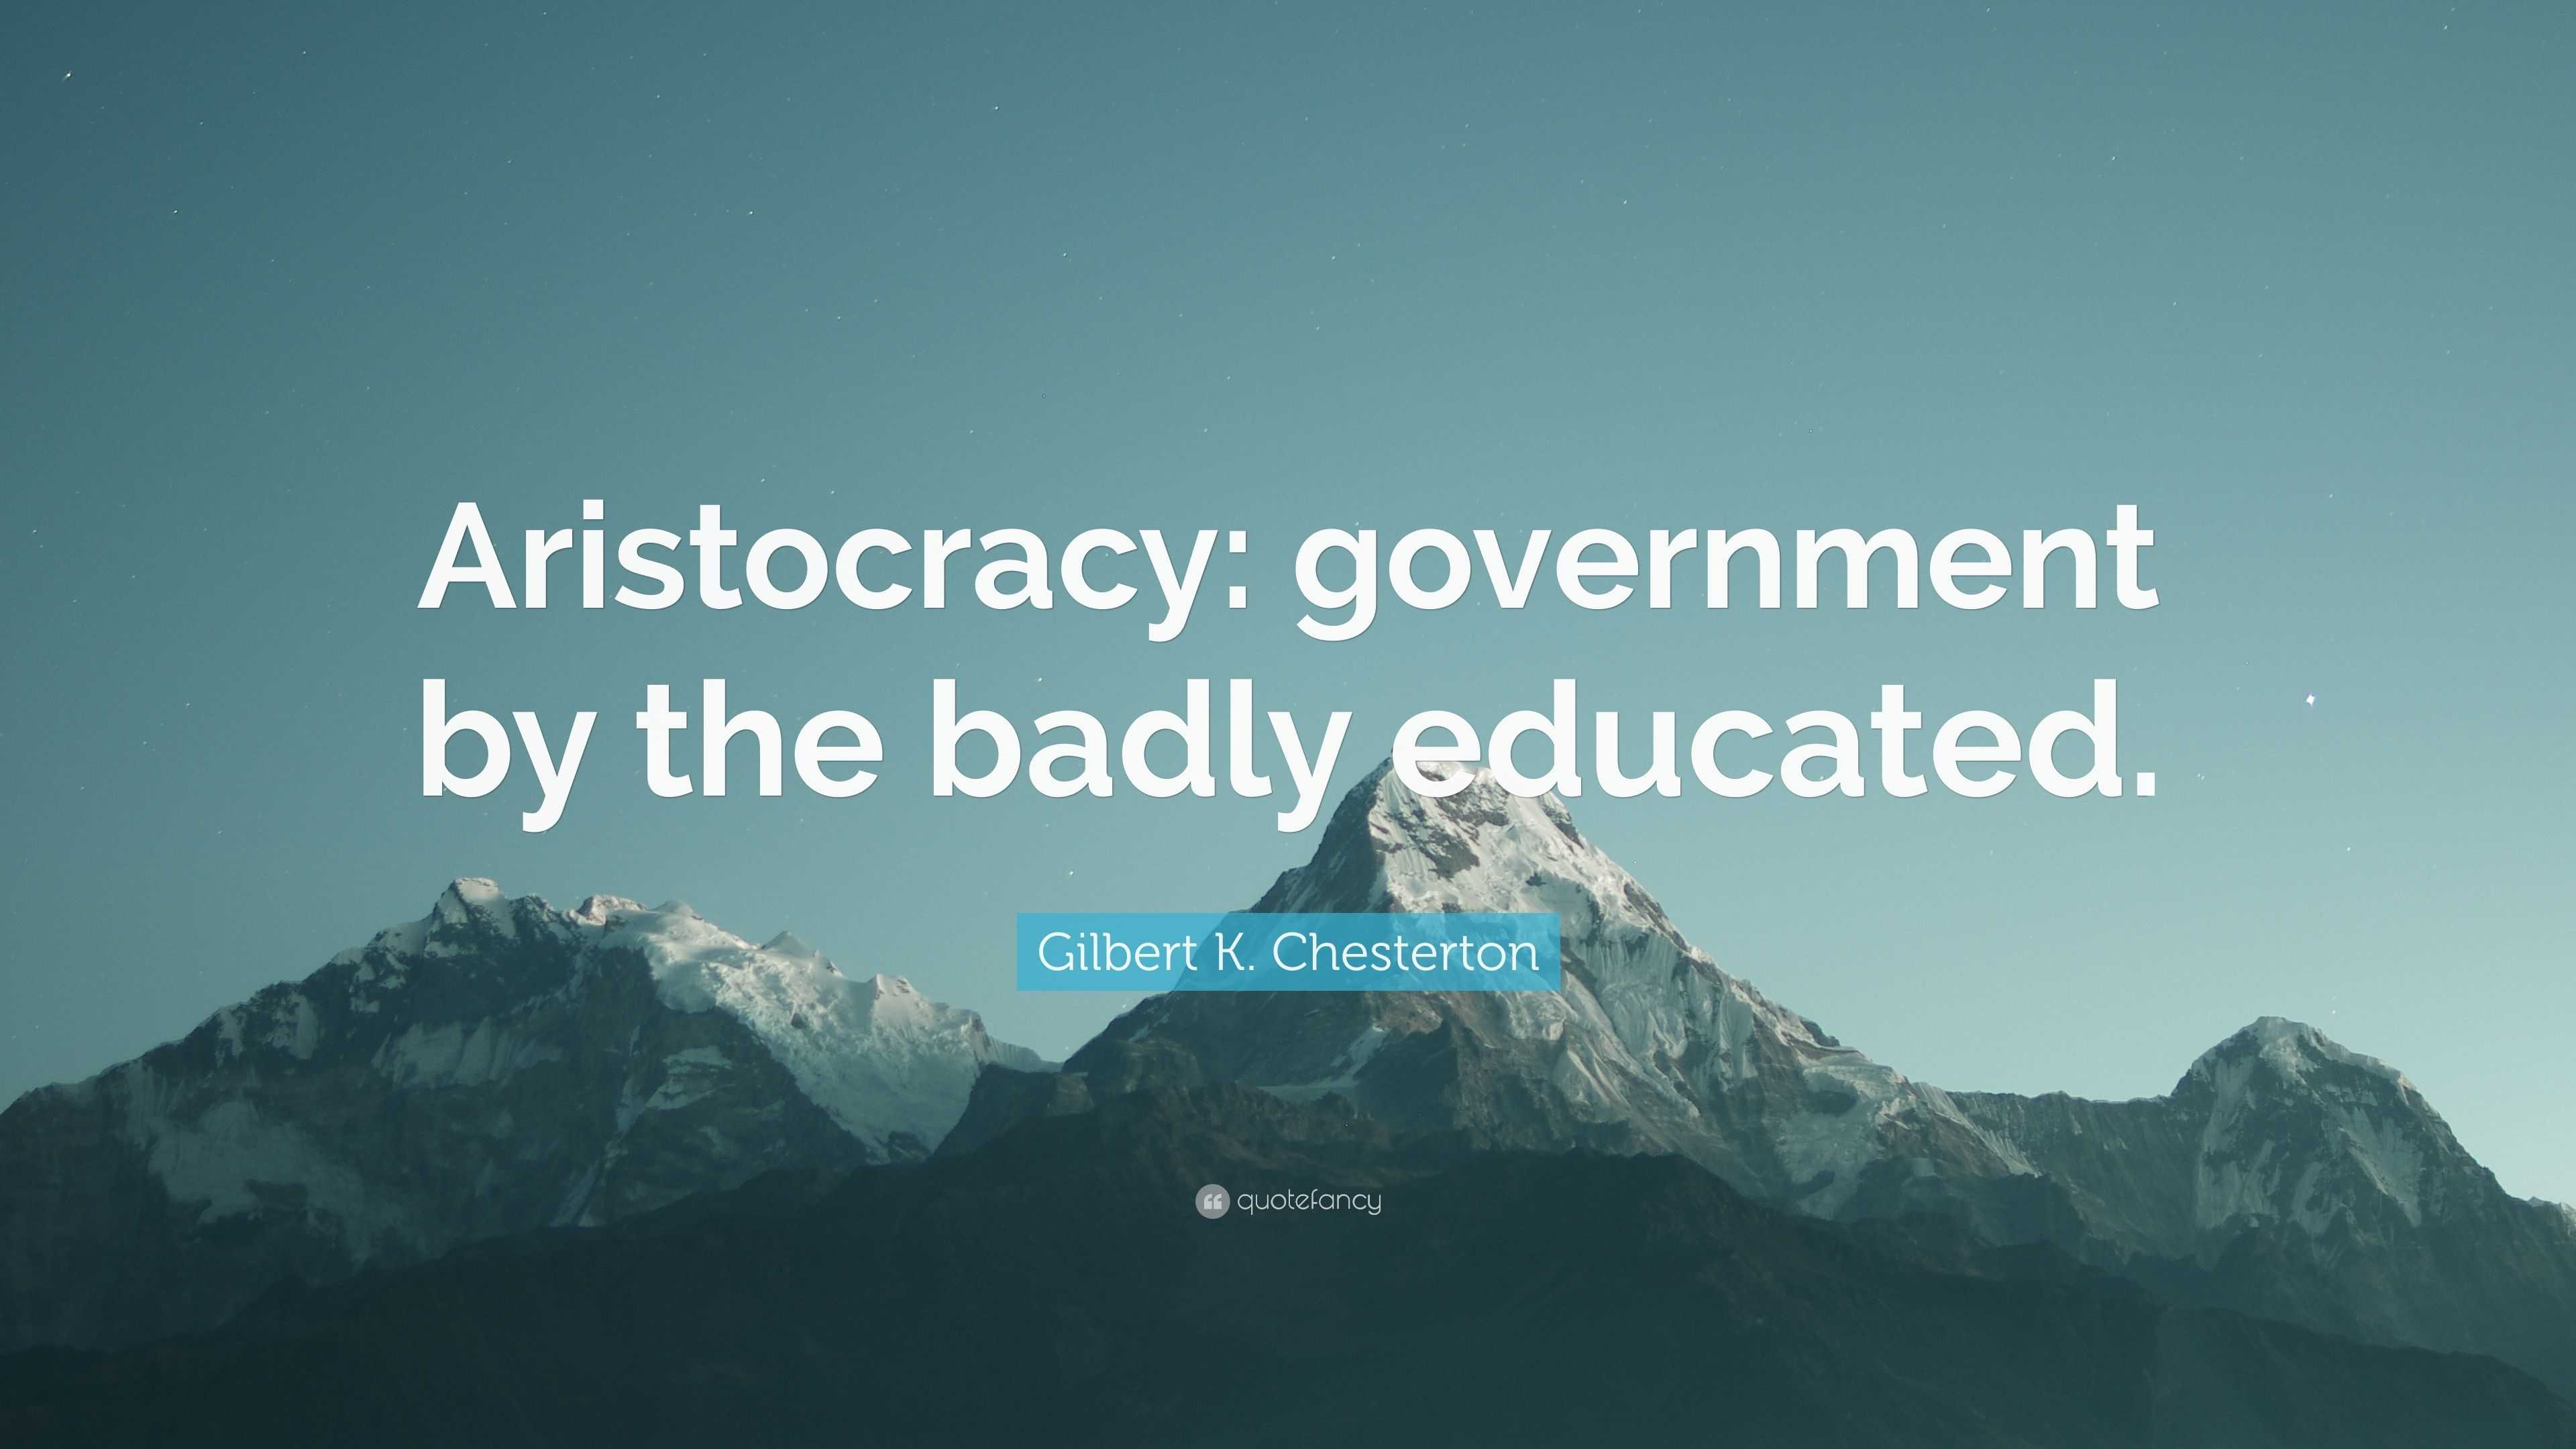 Gilbert K Chesterton Quote Aristocracy Government By The Badly Educated 7 Wallpapers Quotefancy